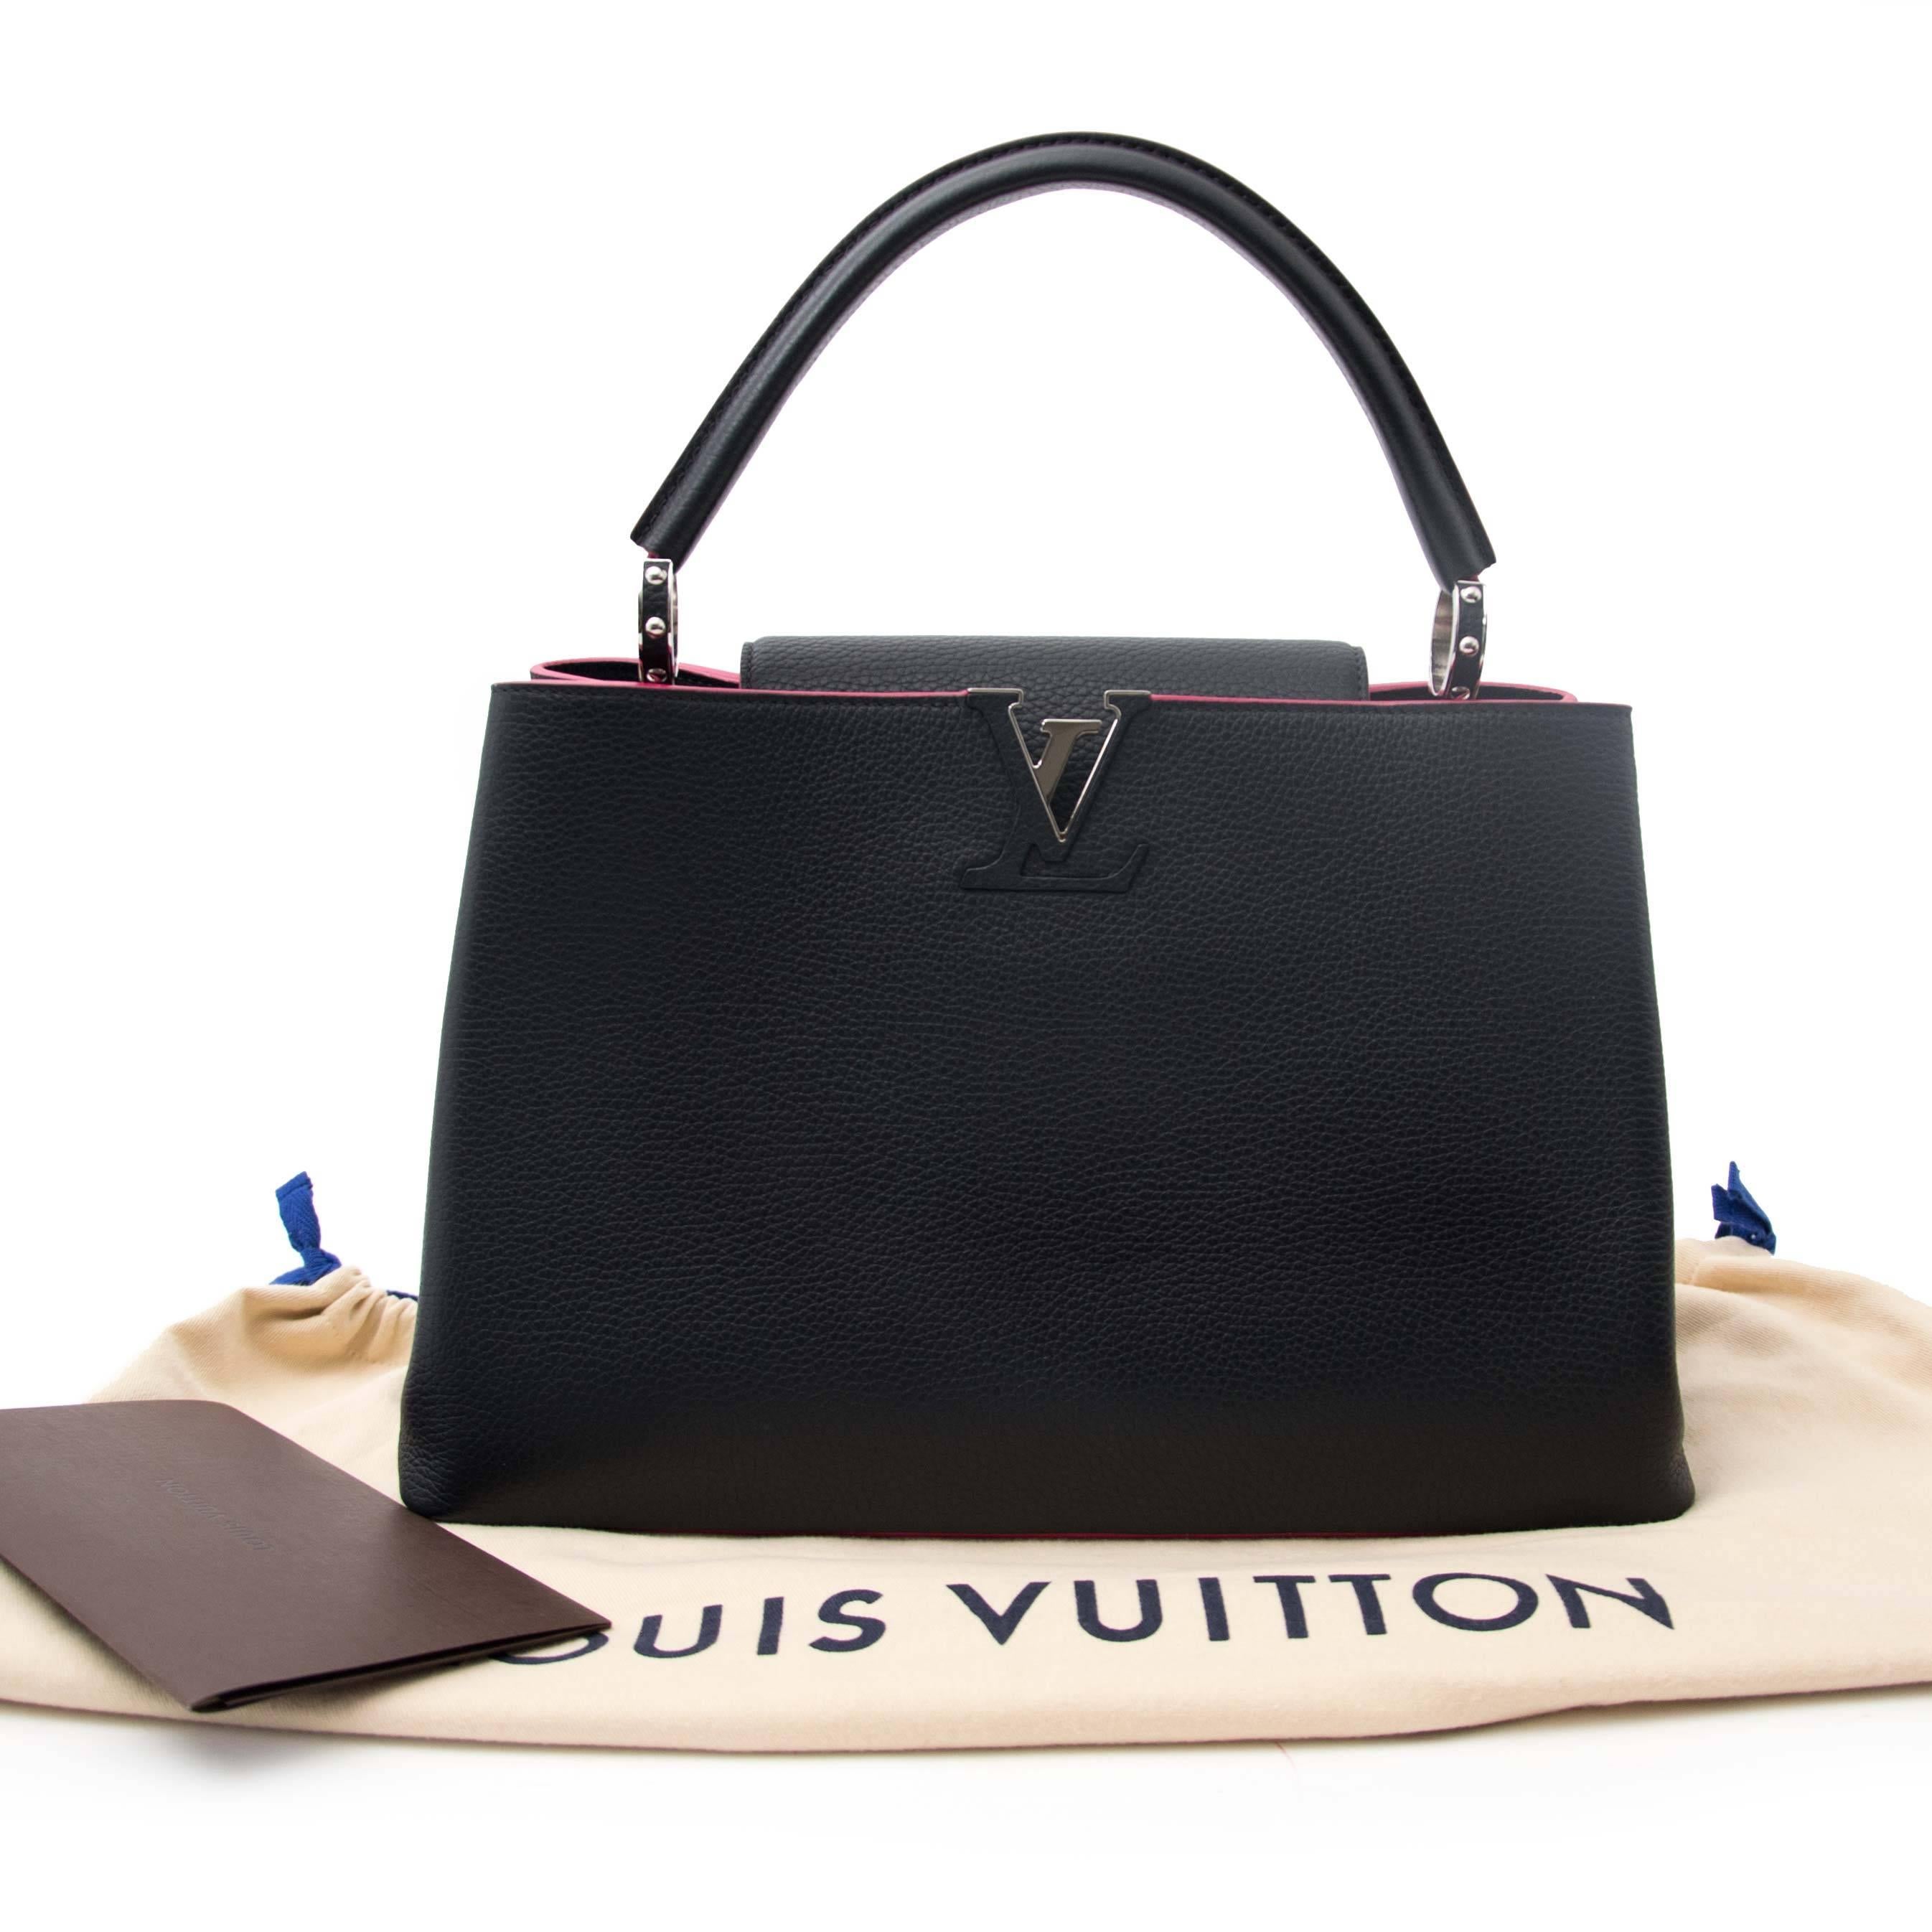 As new

ESTIMATED RETAIL PRICE : € 3980

Louis Vuitton Black Capucines MM Taurillon Pink Lining

This timeless and elegant Capucines bag is made out of full-grain Taurillon leather, it combines refined details, including a ridgid handle with bold